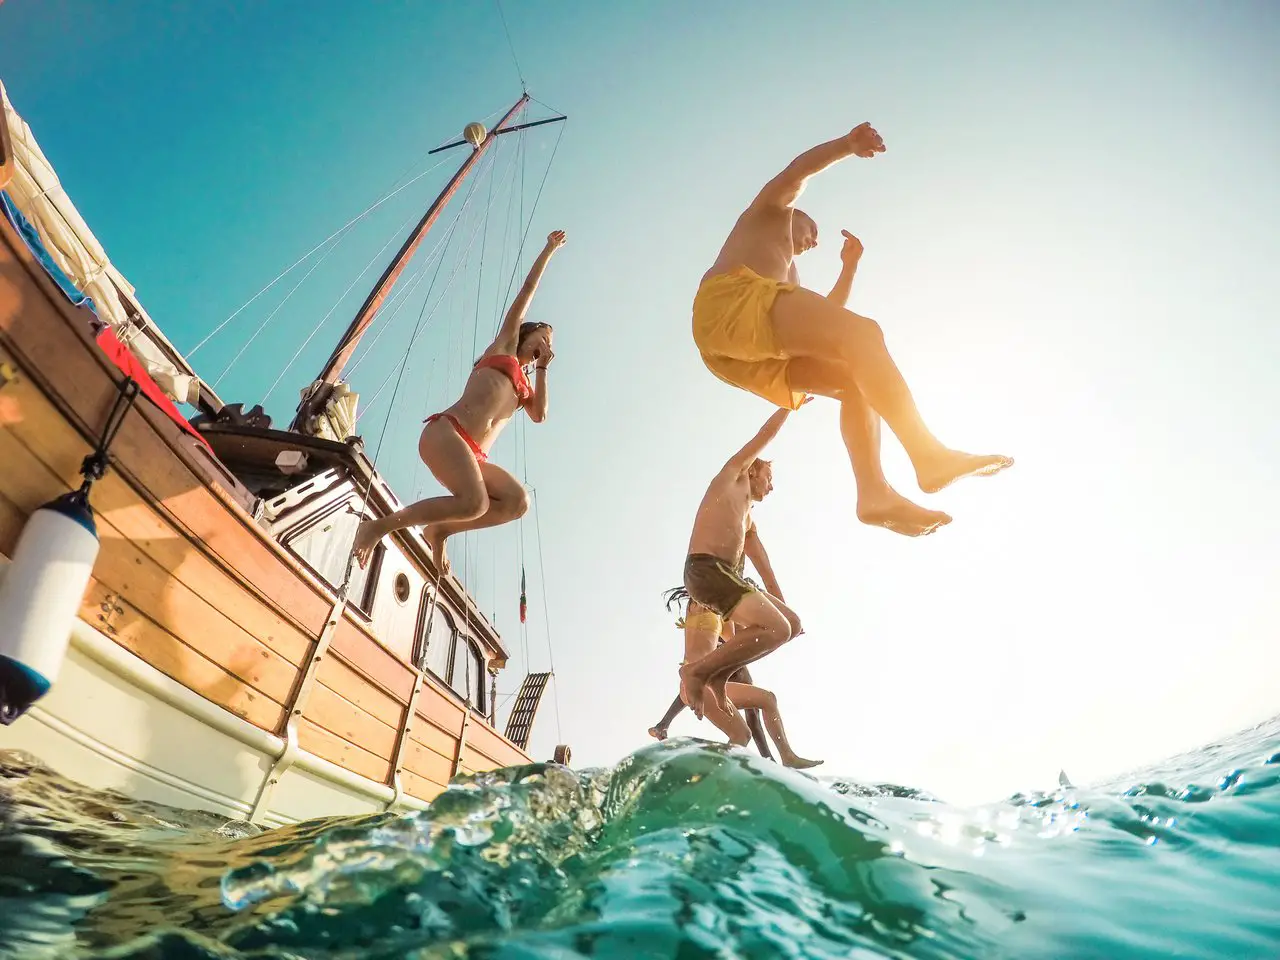 People jumping off a small boat into the ocean